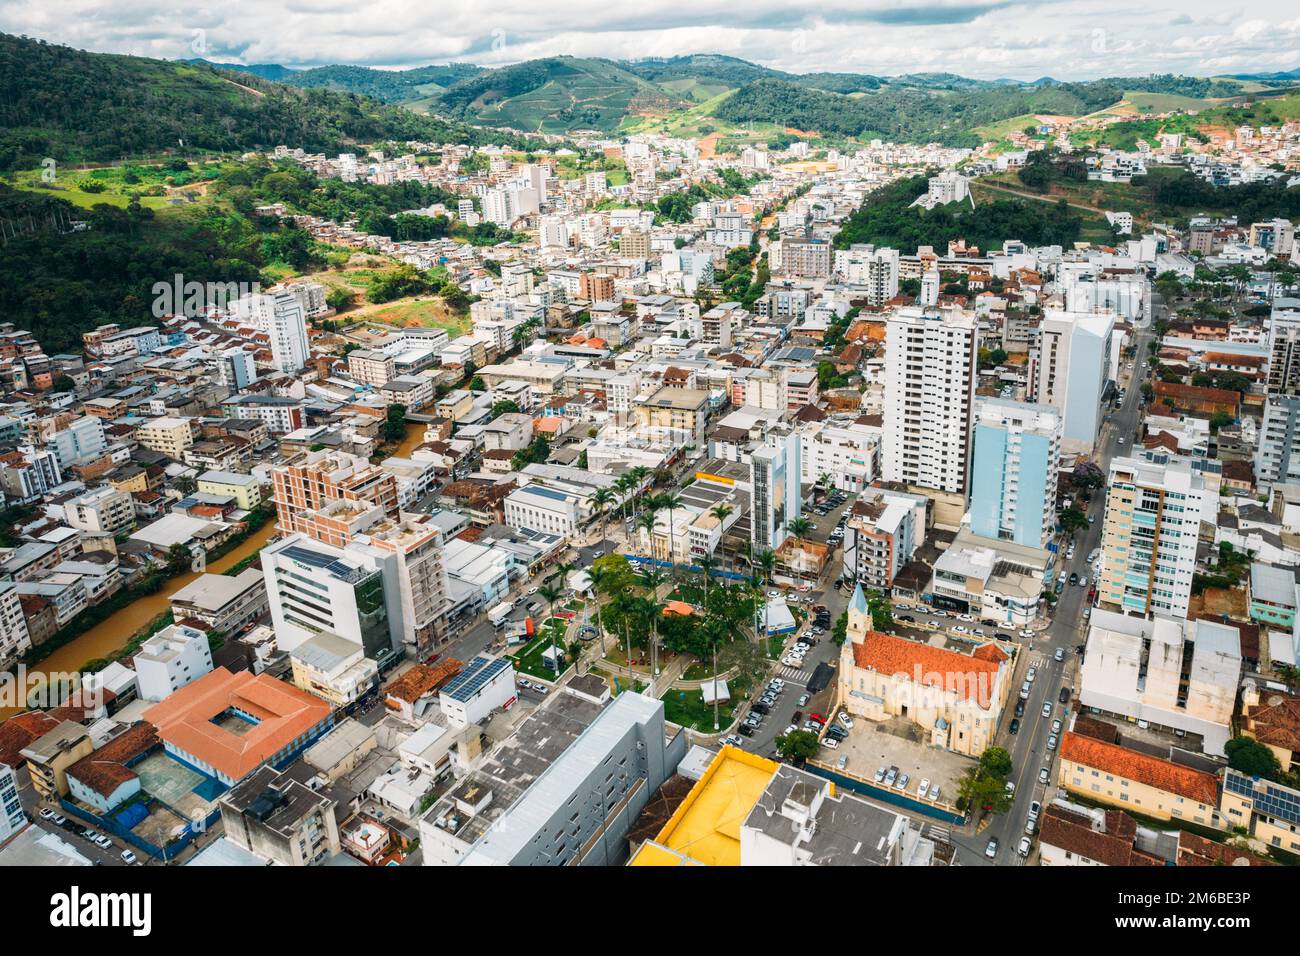 Vew of main square with St. Lawrence Church in Manhuacu, Minas Gerais, Brazil with surrounding cityscape Stock Photo